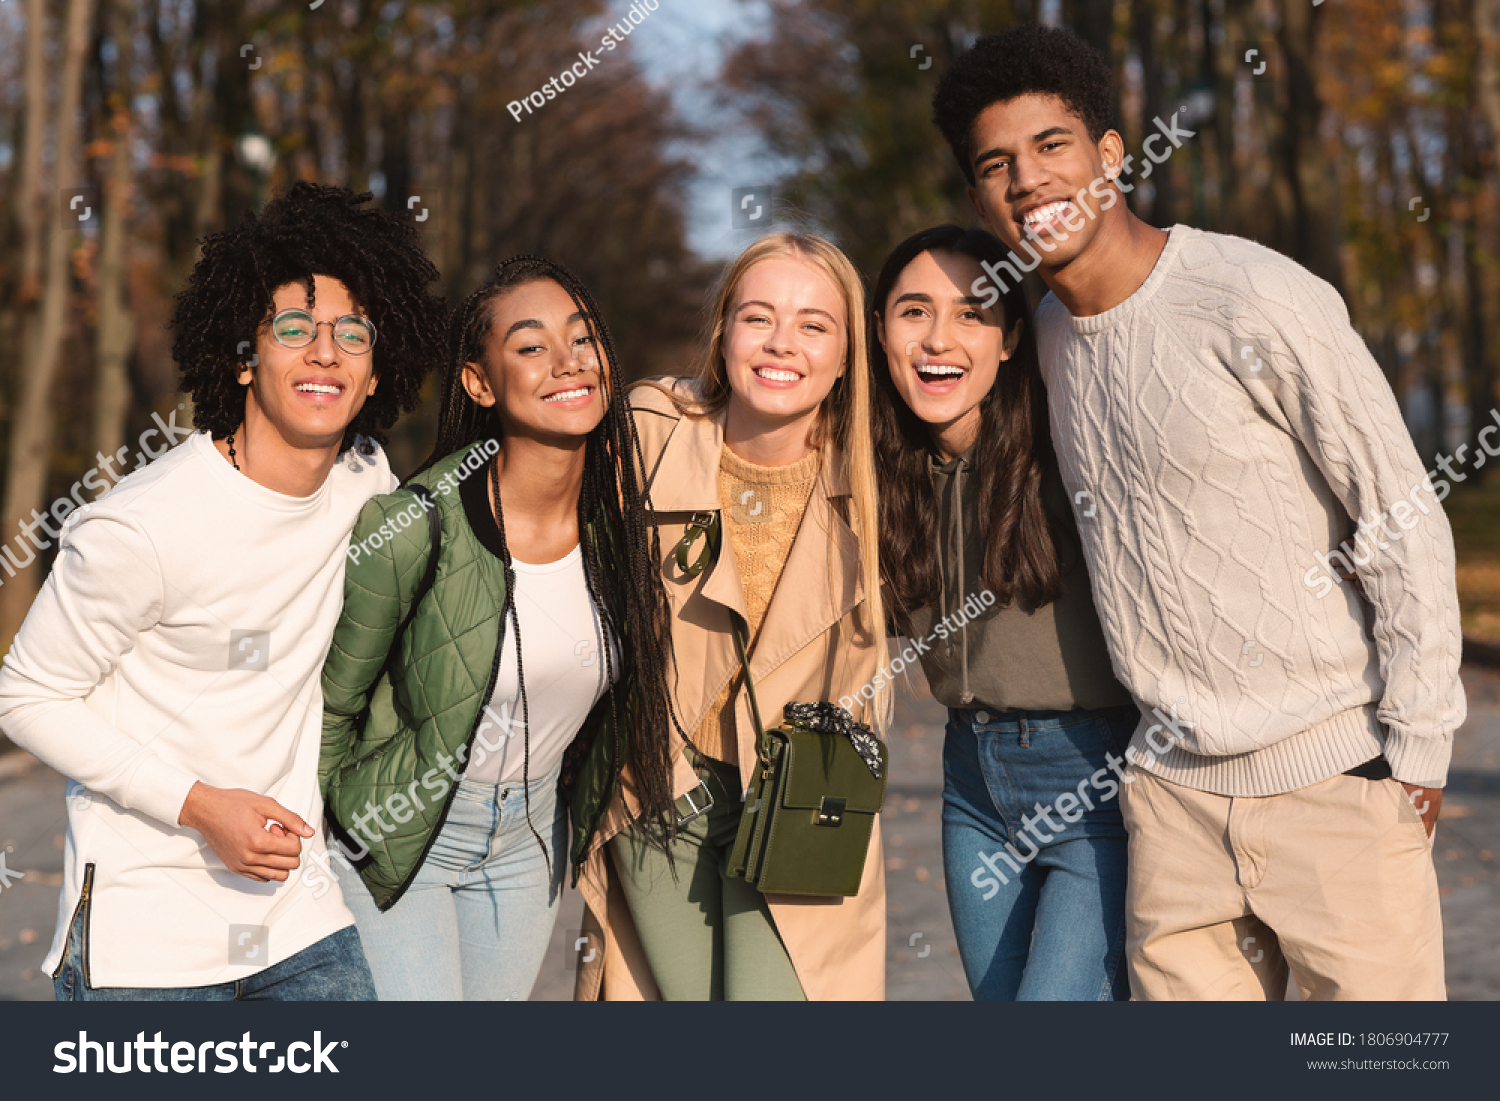 4,864 Mixed Group Young Teens Images, Stock Photos & Vectors 